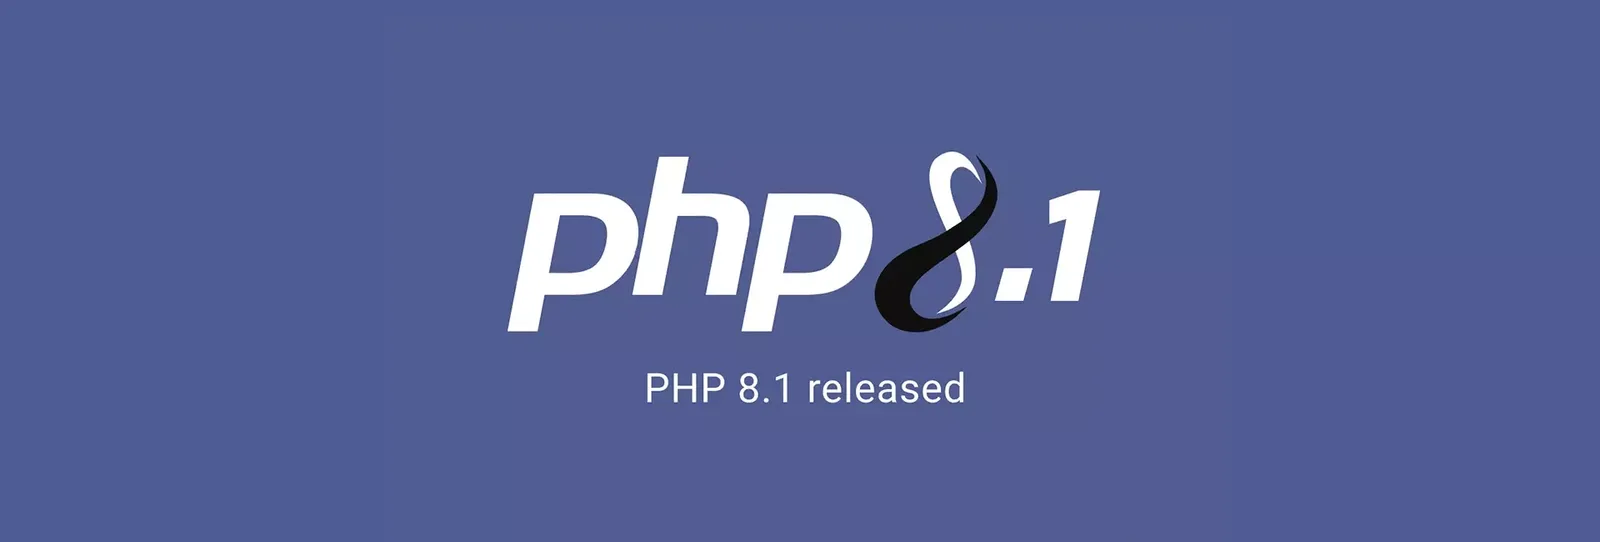 A new and improved version of PHP is here: PHP 8.1